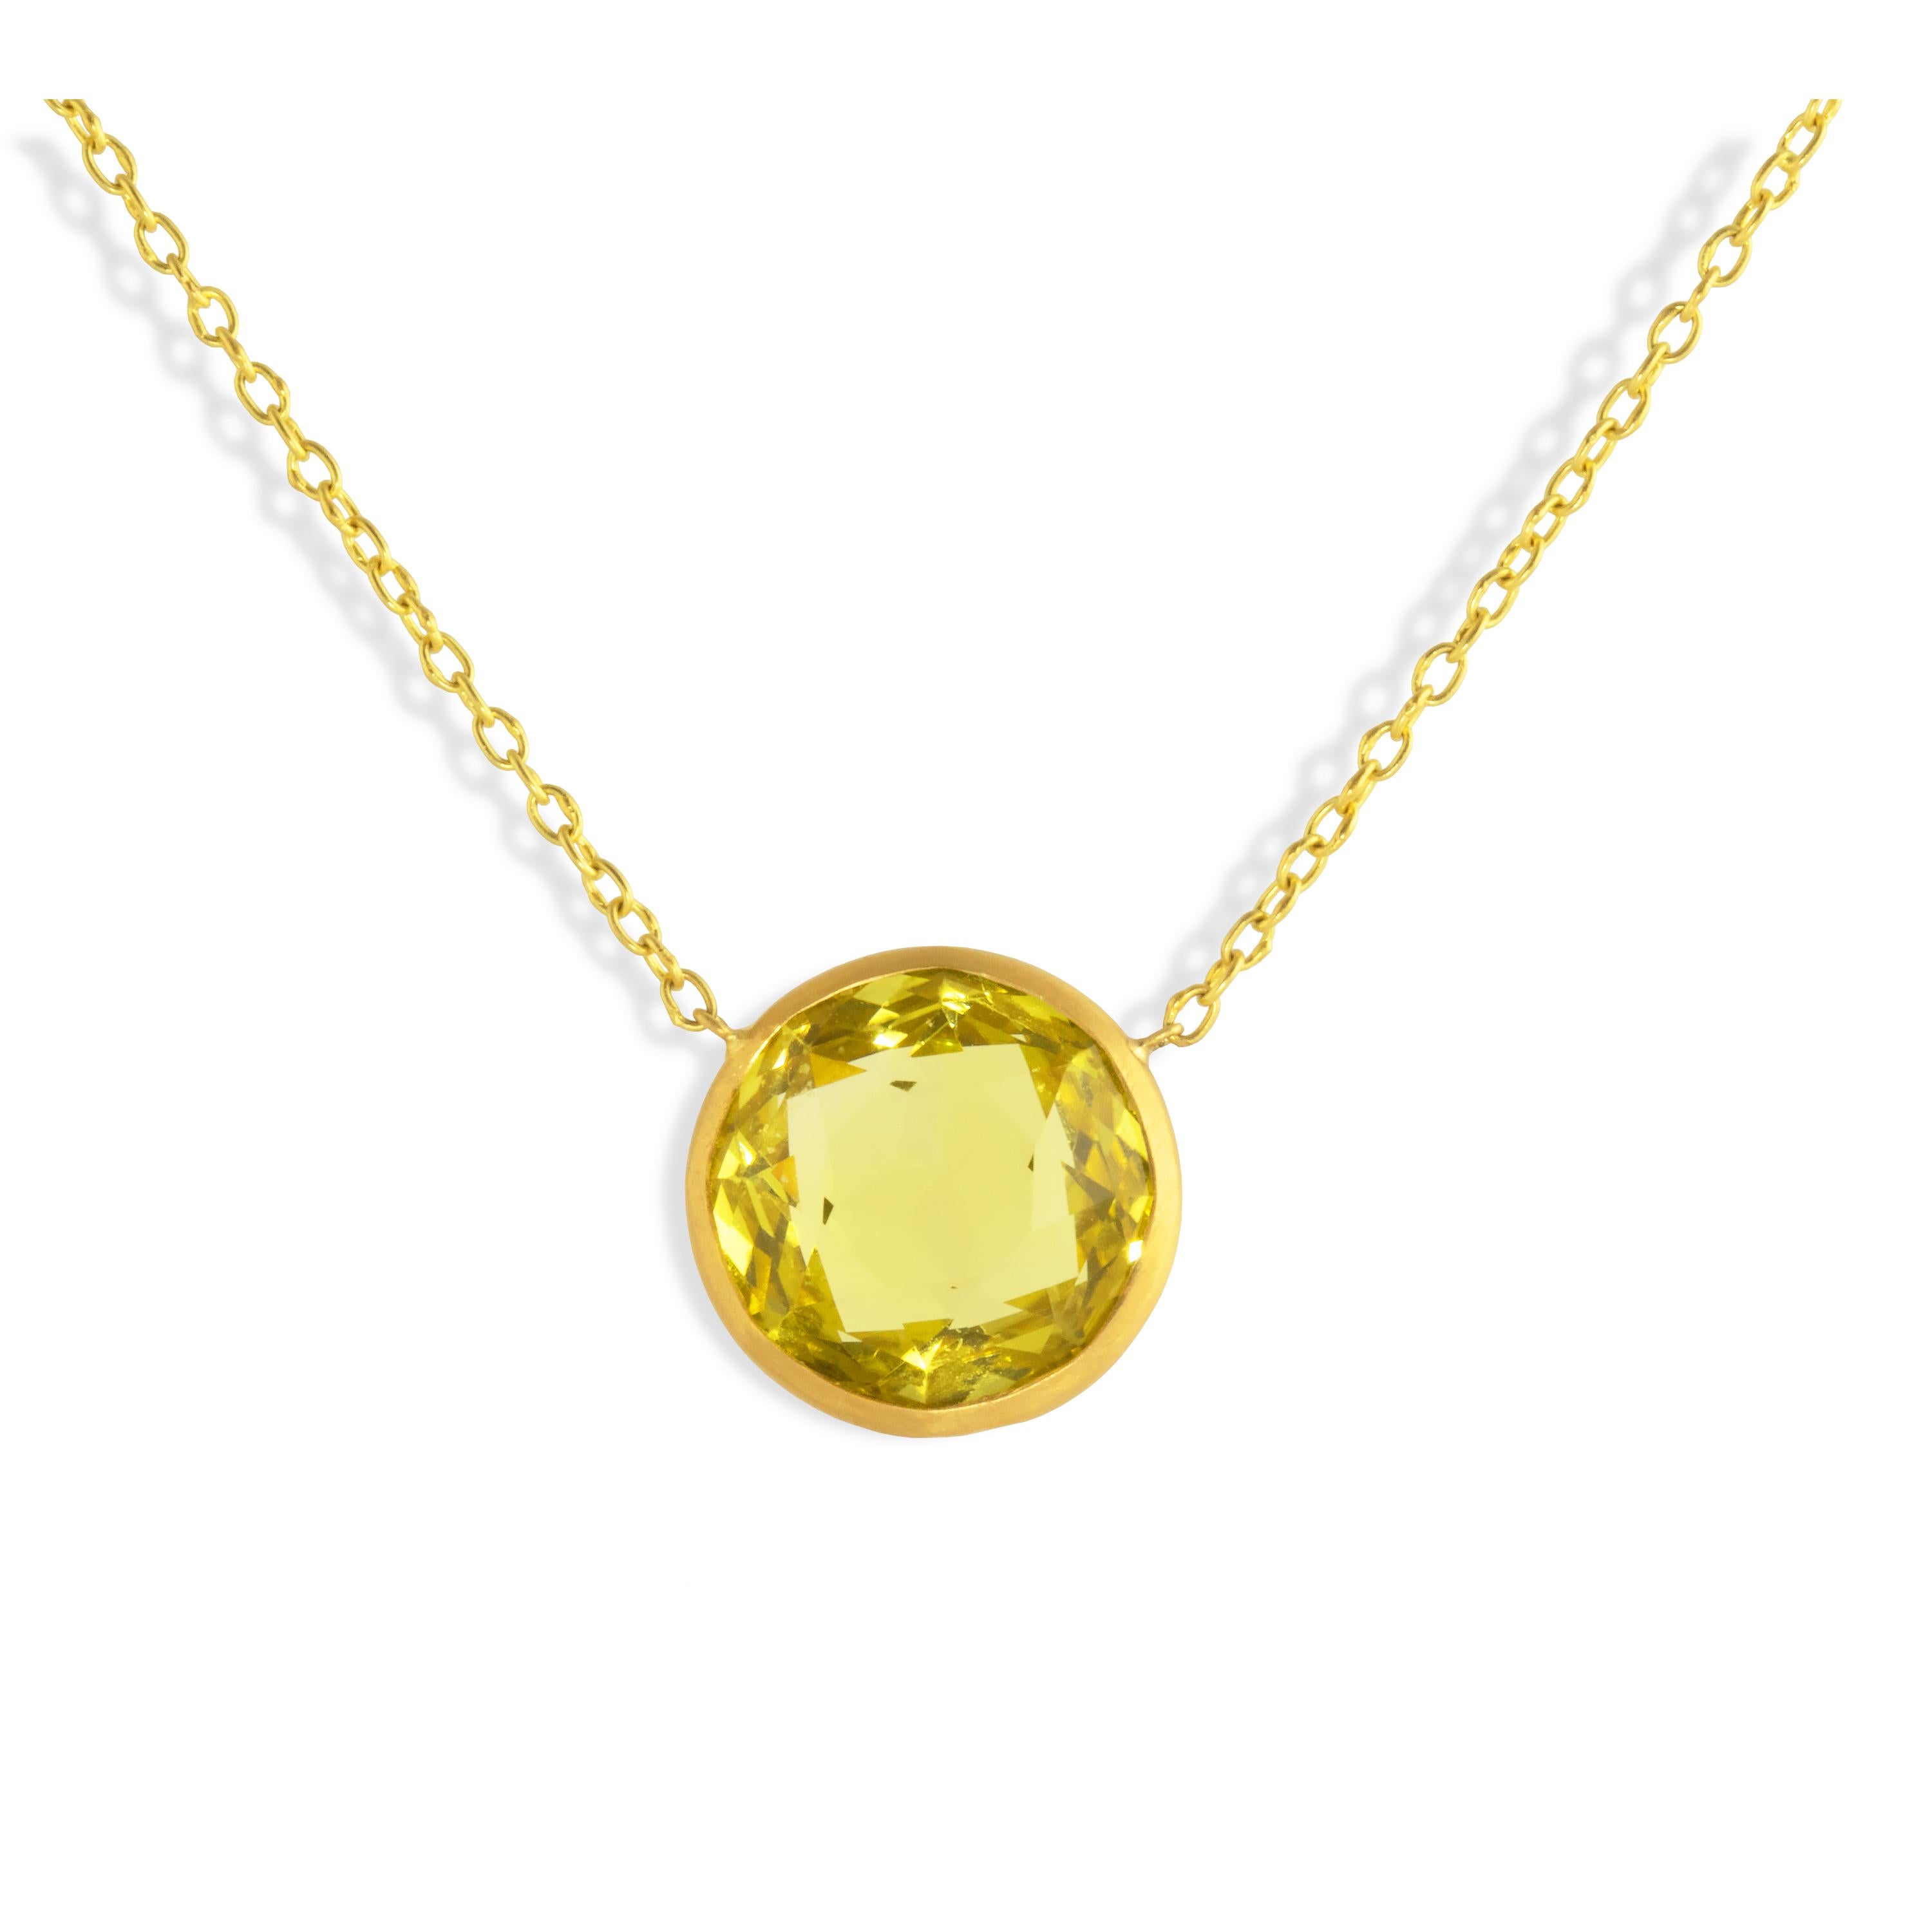 Featuring a 10 carat Lemon Quartz double sided faceted Necklace set in 22k gold and featured on a 22k gold chain.  Hook closure.  Perfect alone or layered with other necklaces.

The bright yellow color of Lemon Quartz is considered a symbol of